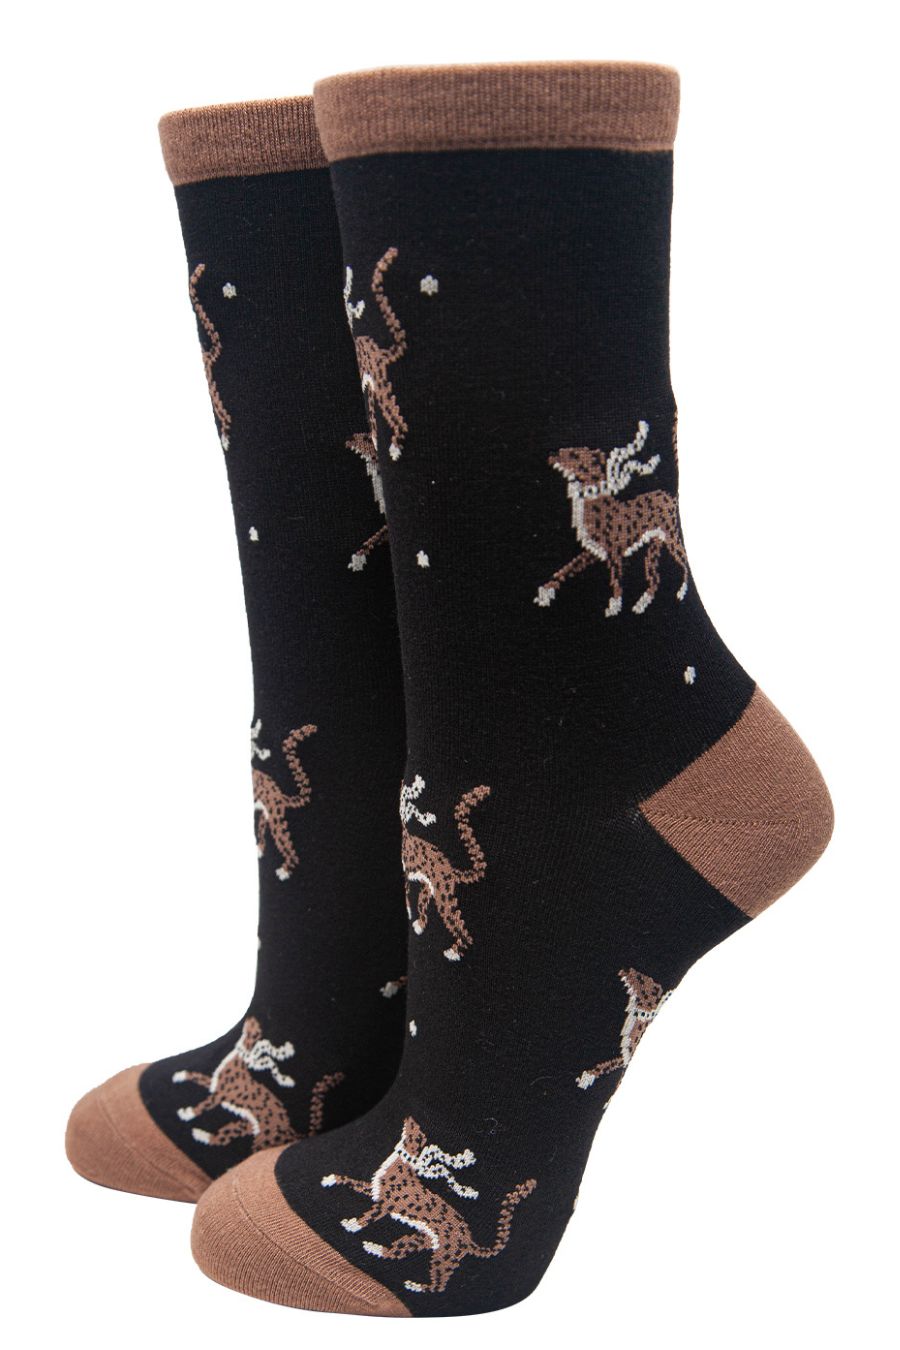 black and brown ankle socks with cheetah cats on them